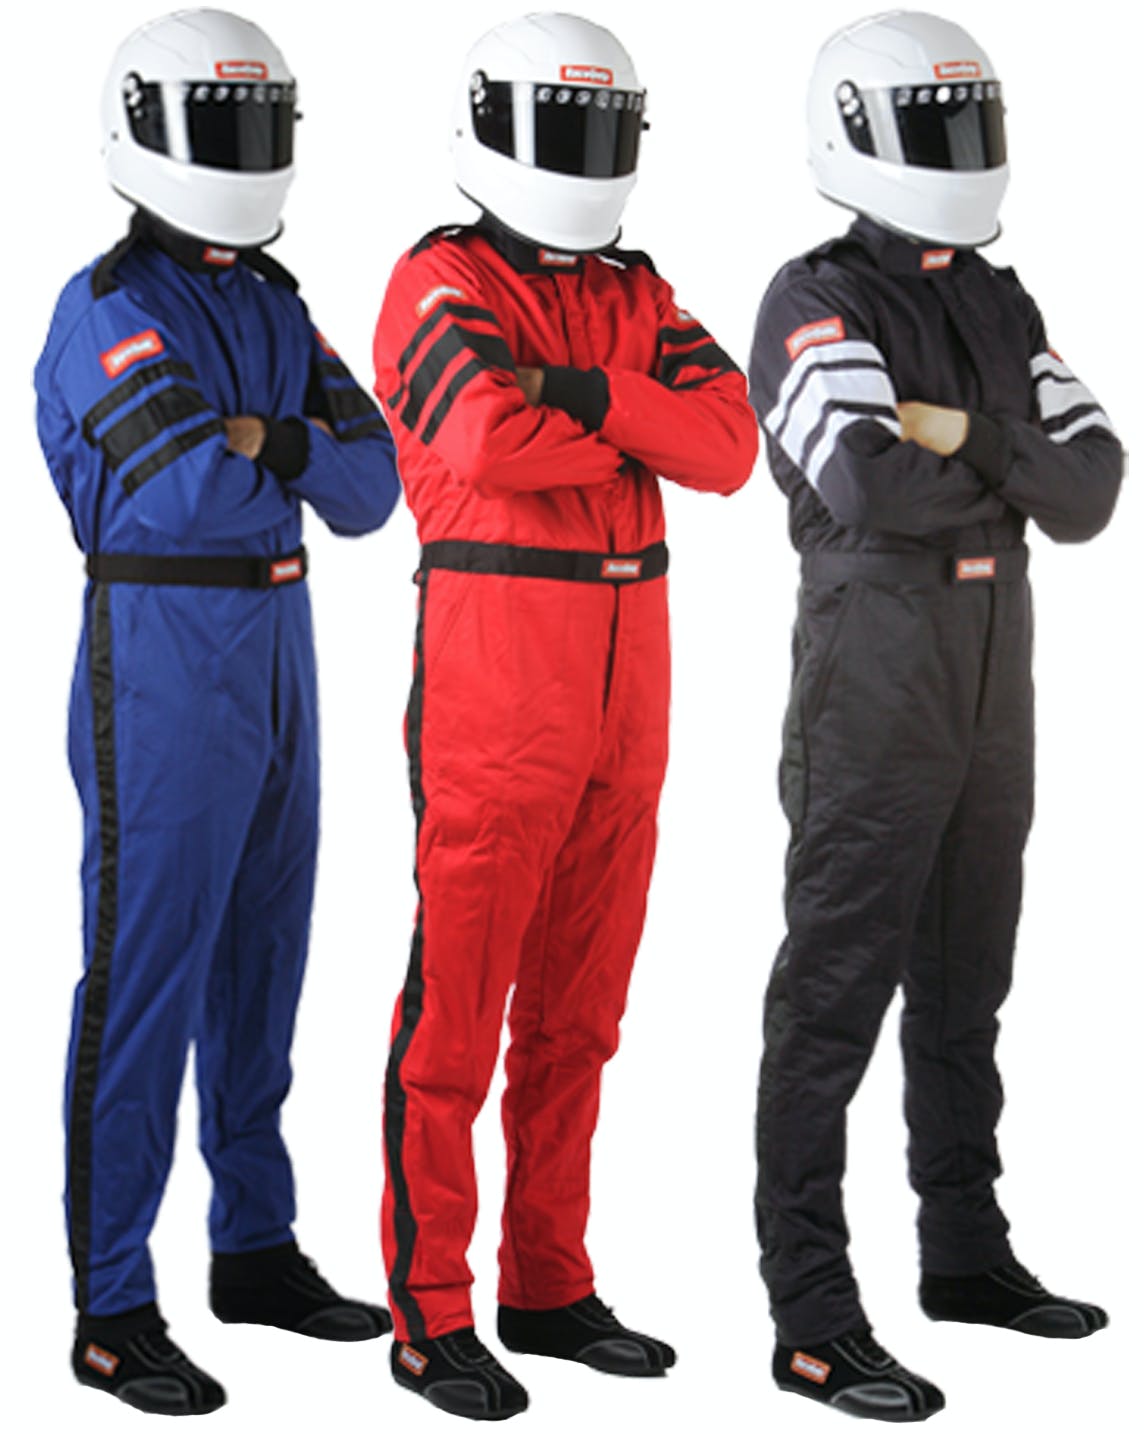 RaceQuip 120005 SFI-5 Pyrovatex One-Piece Multi-Layer Racing Fire Suit (Black, Large)